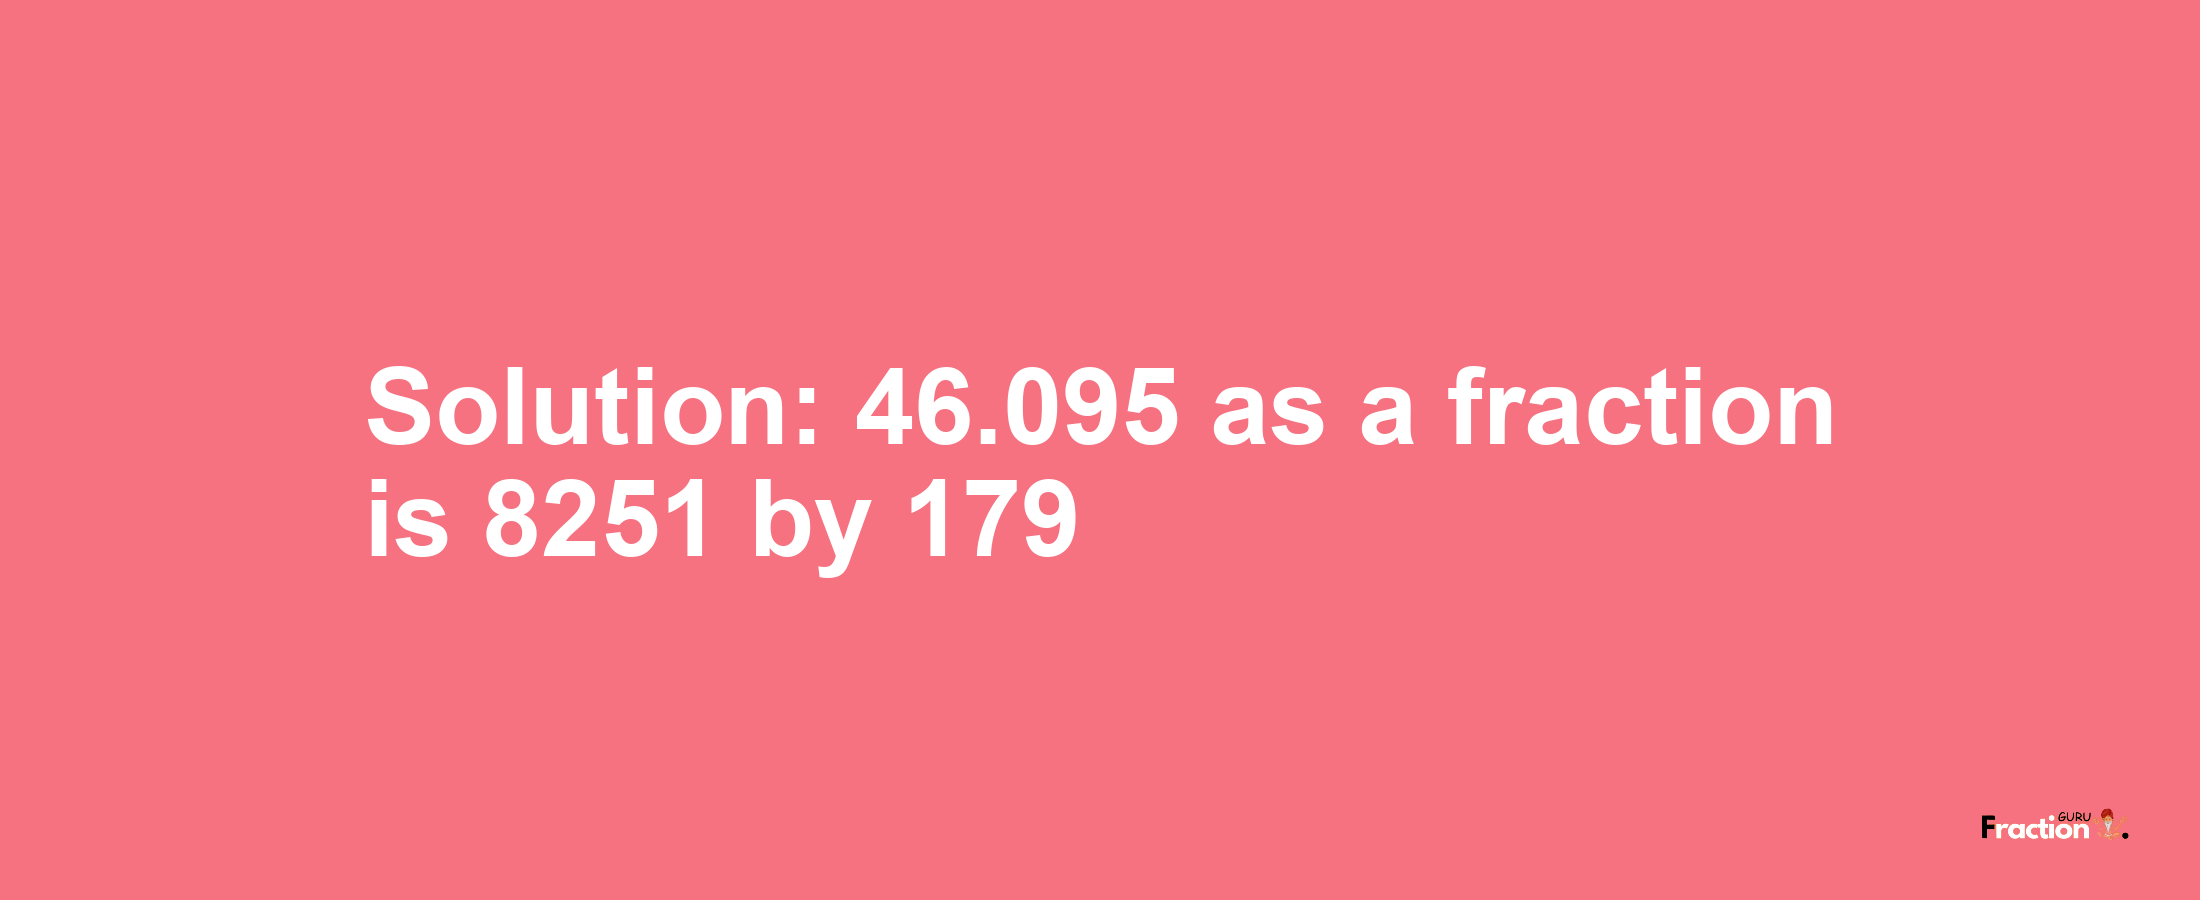 Solution:46.095 as a fraction is 8251/179